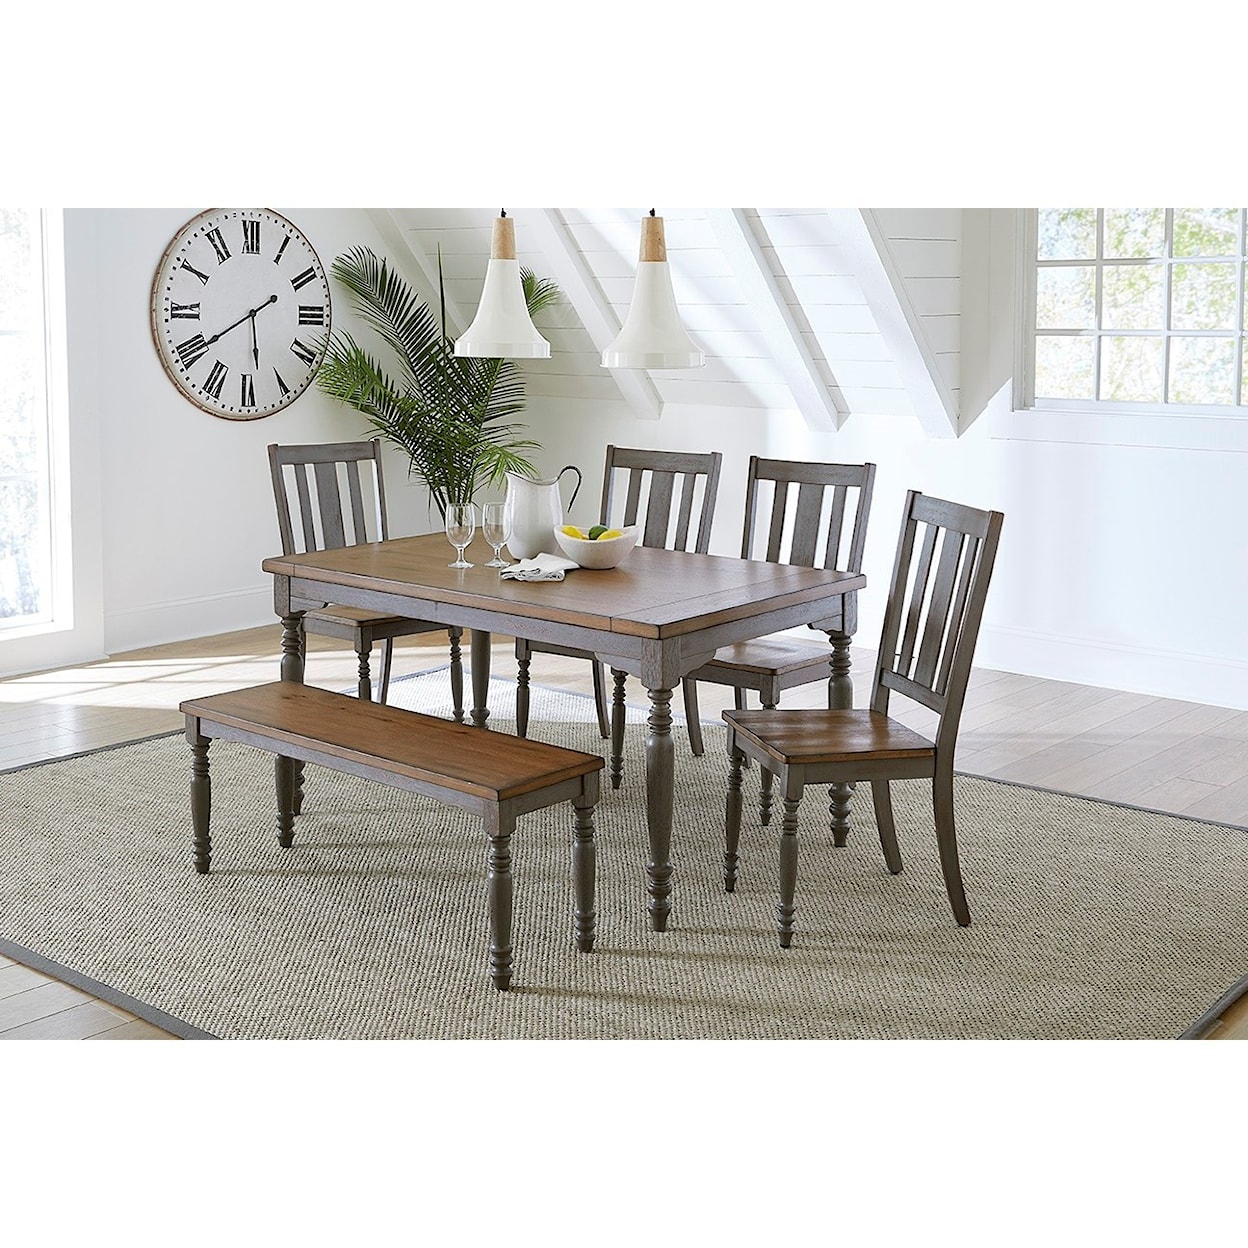 Carolina Chairs Midori Table and Chair Set with Bench